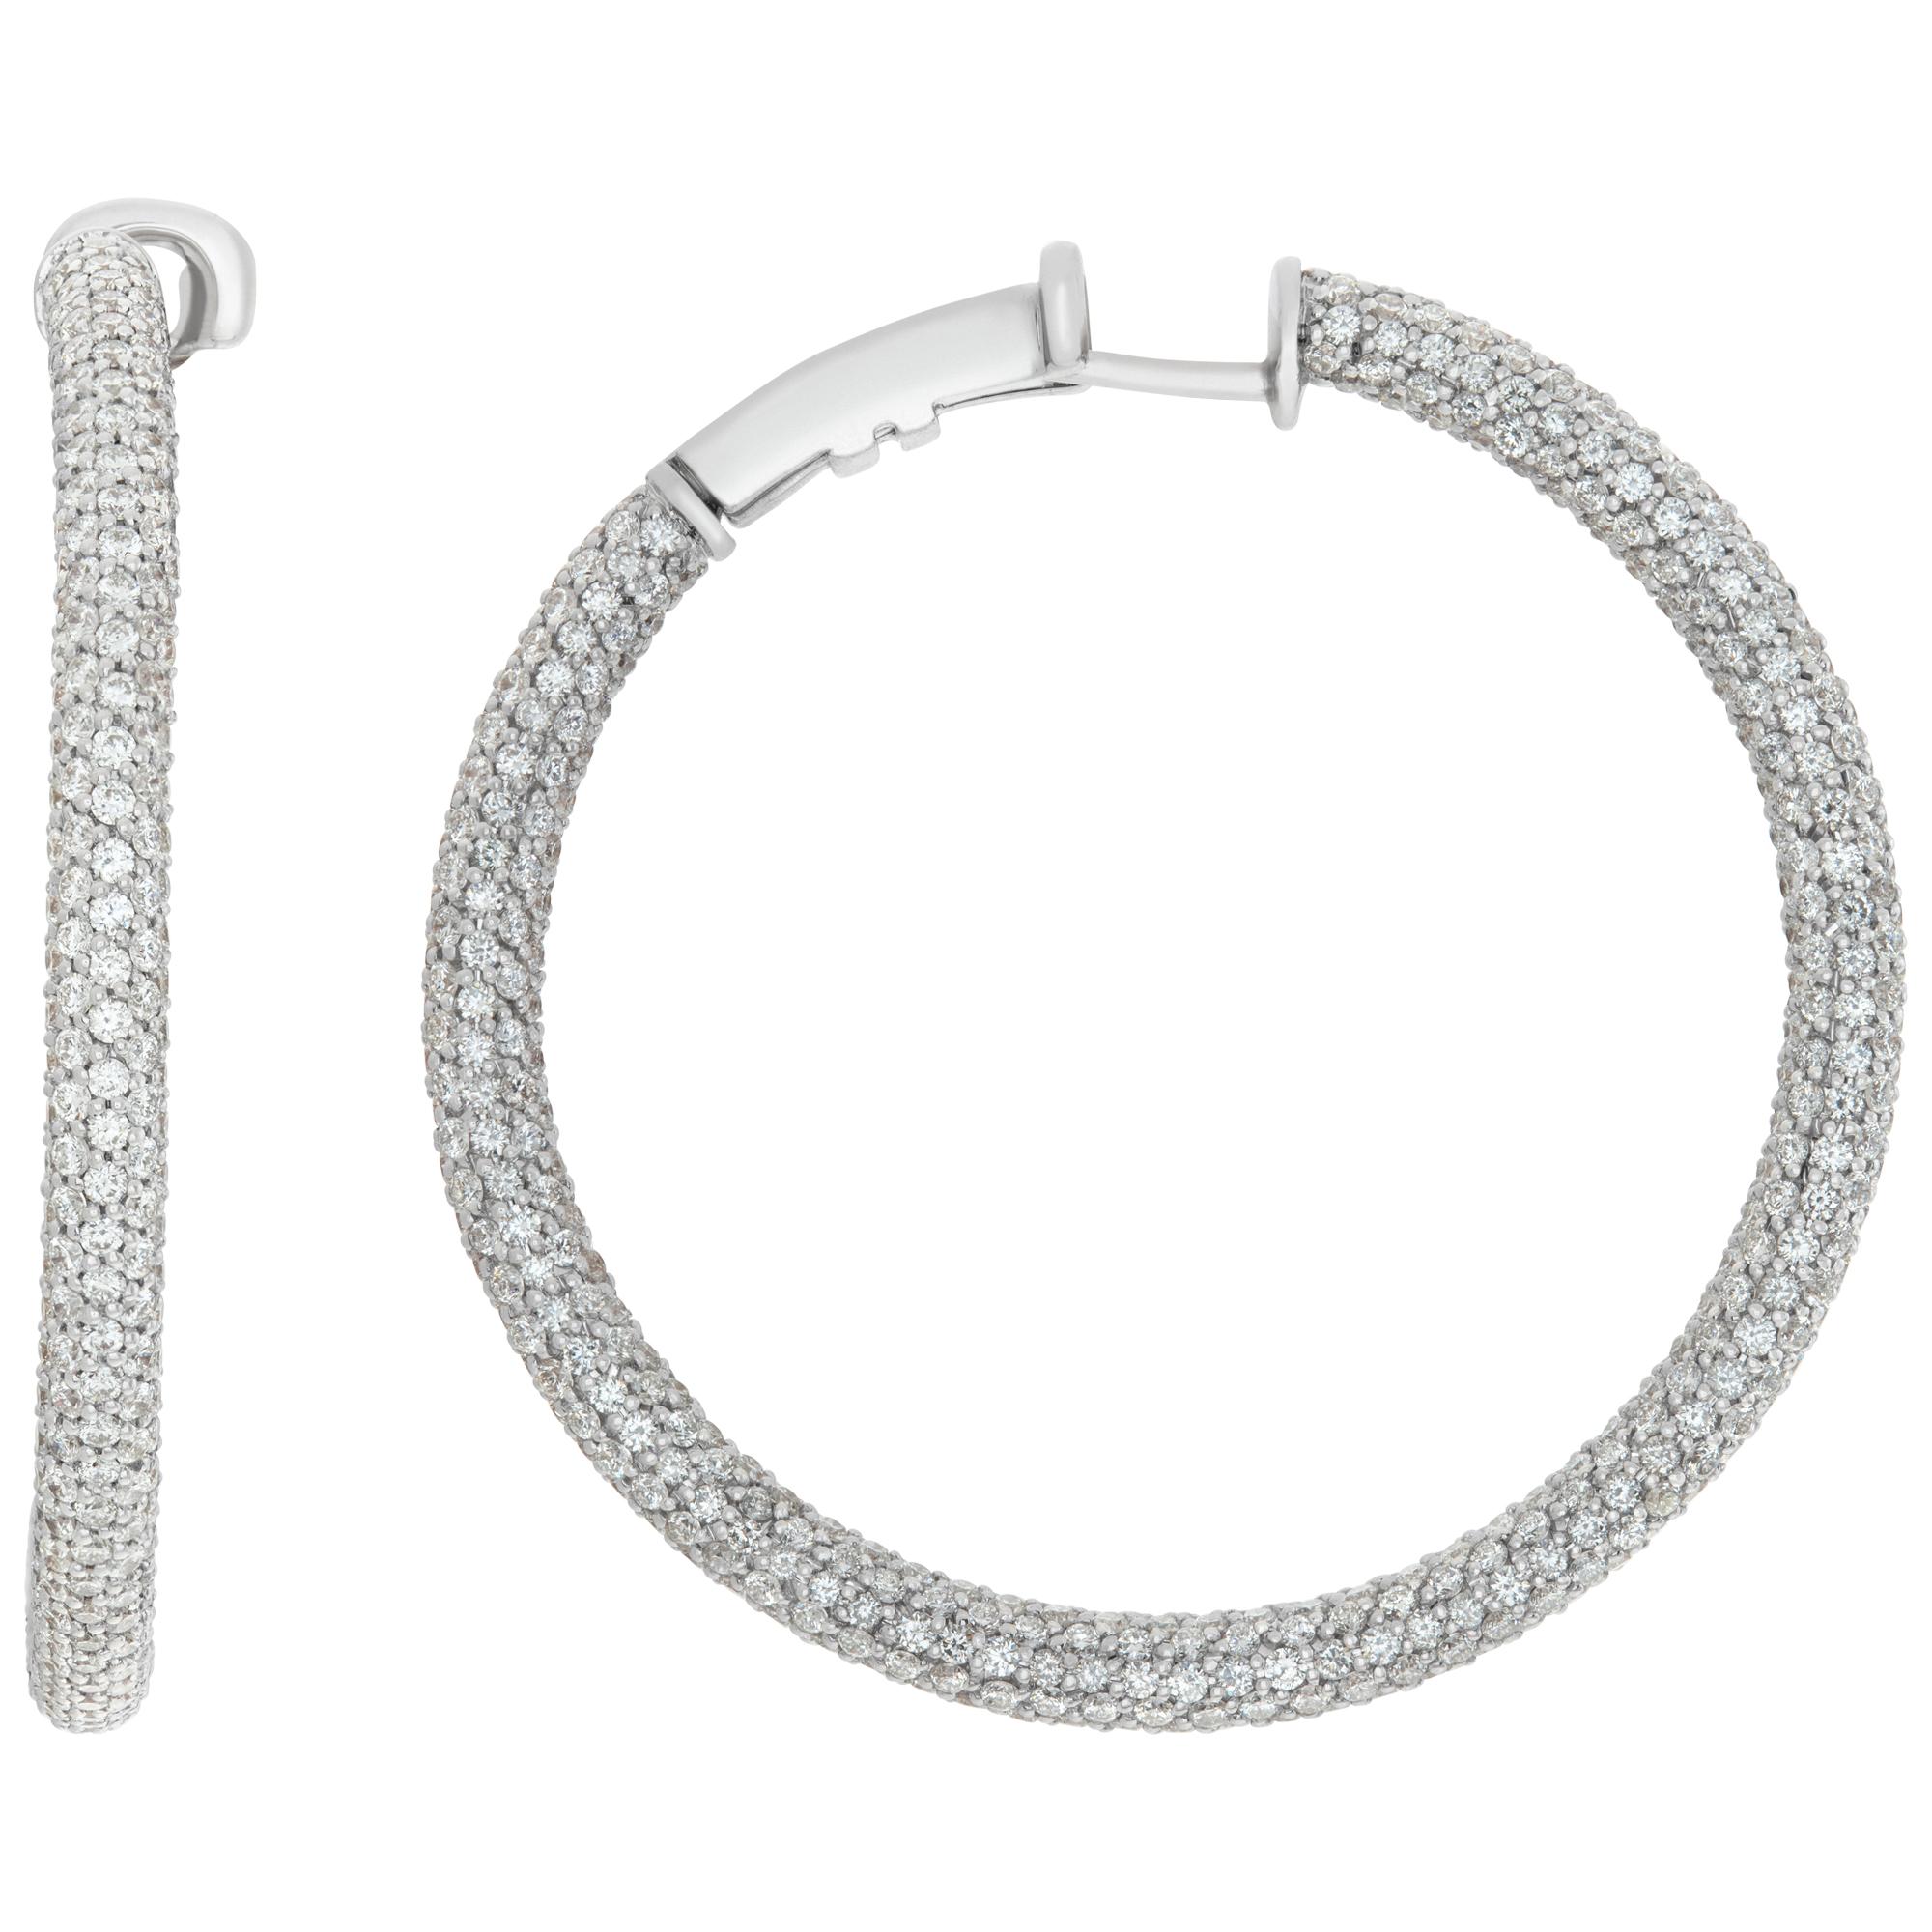 18k White Gold Pave Diamond Hoop Earrings In Excellent Condition For Sale In Surfside, FL